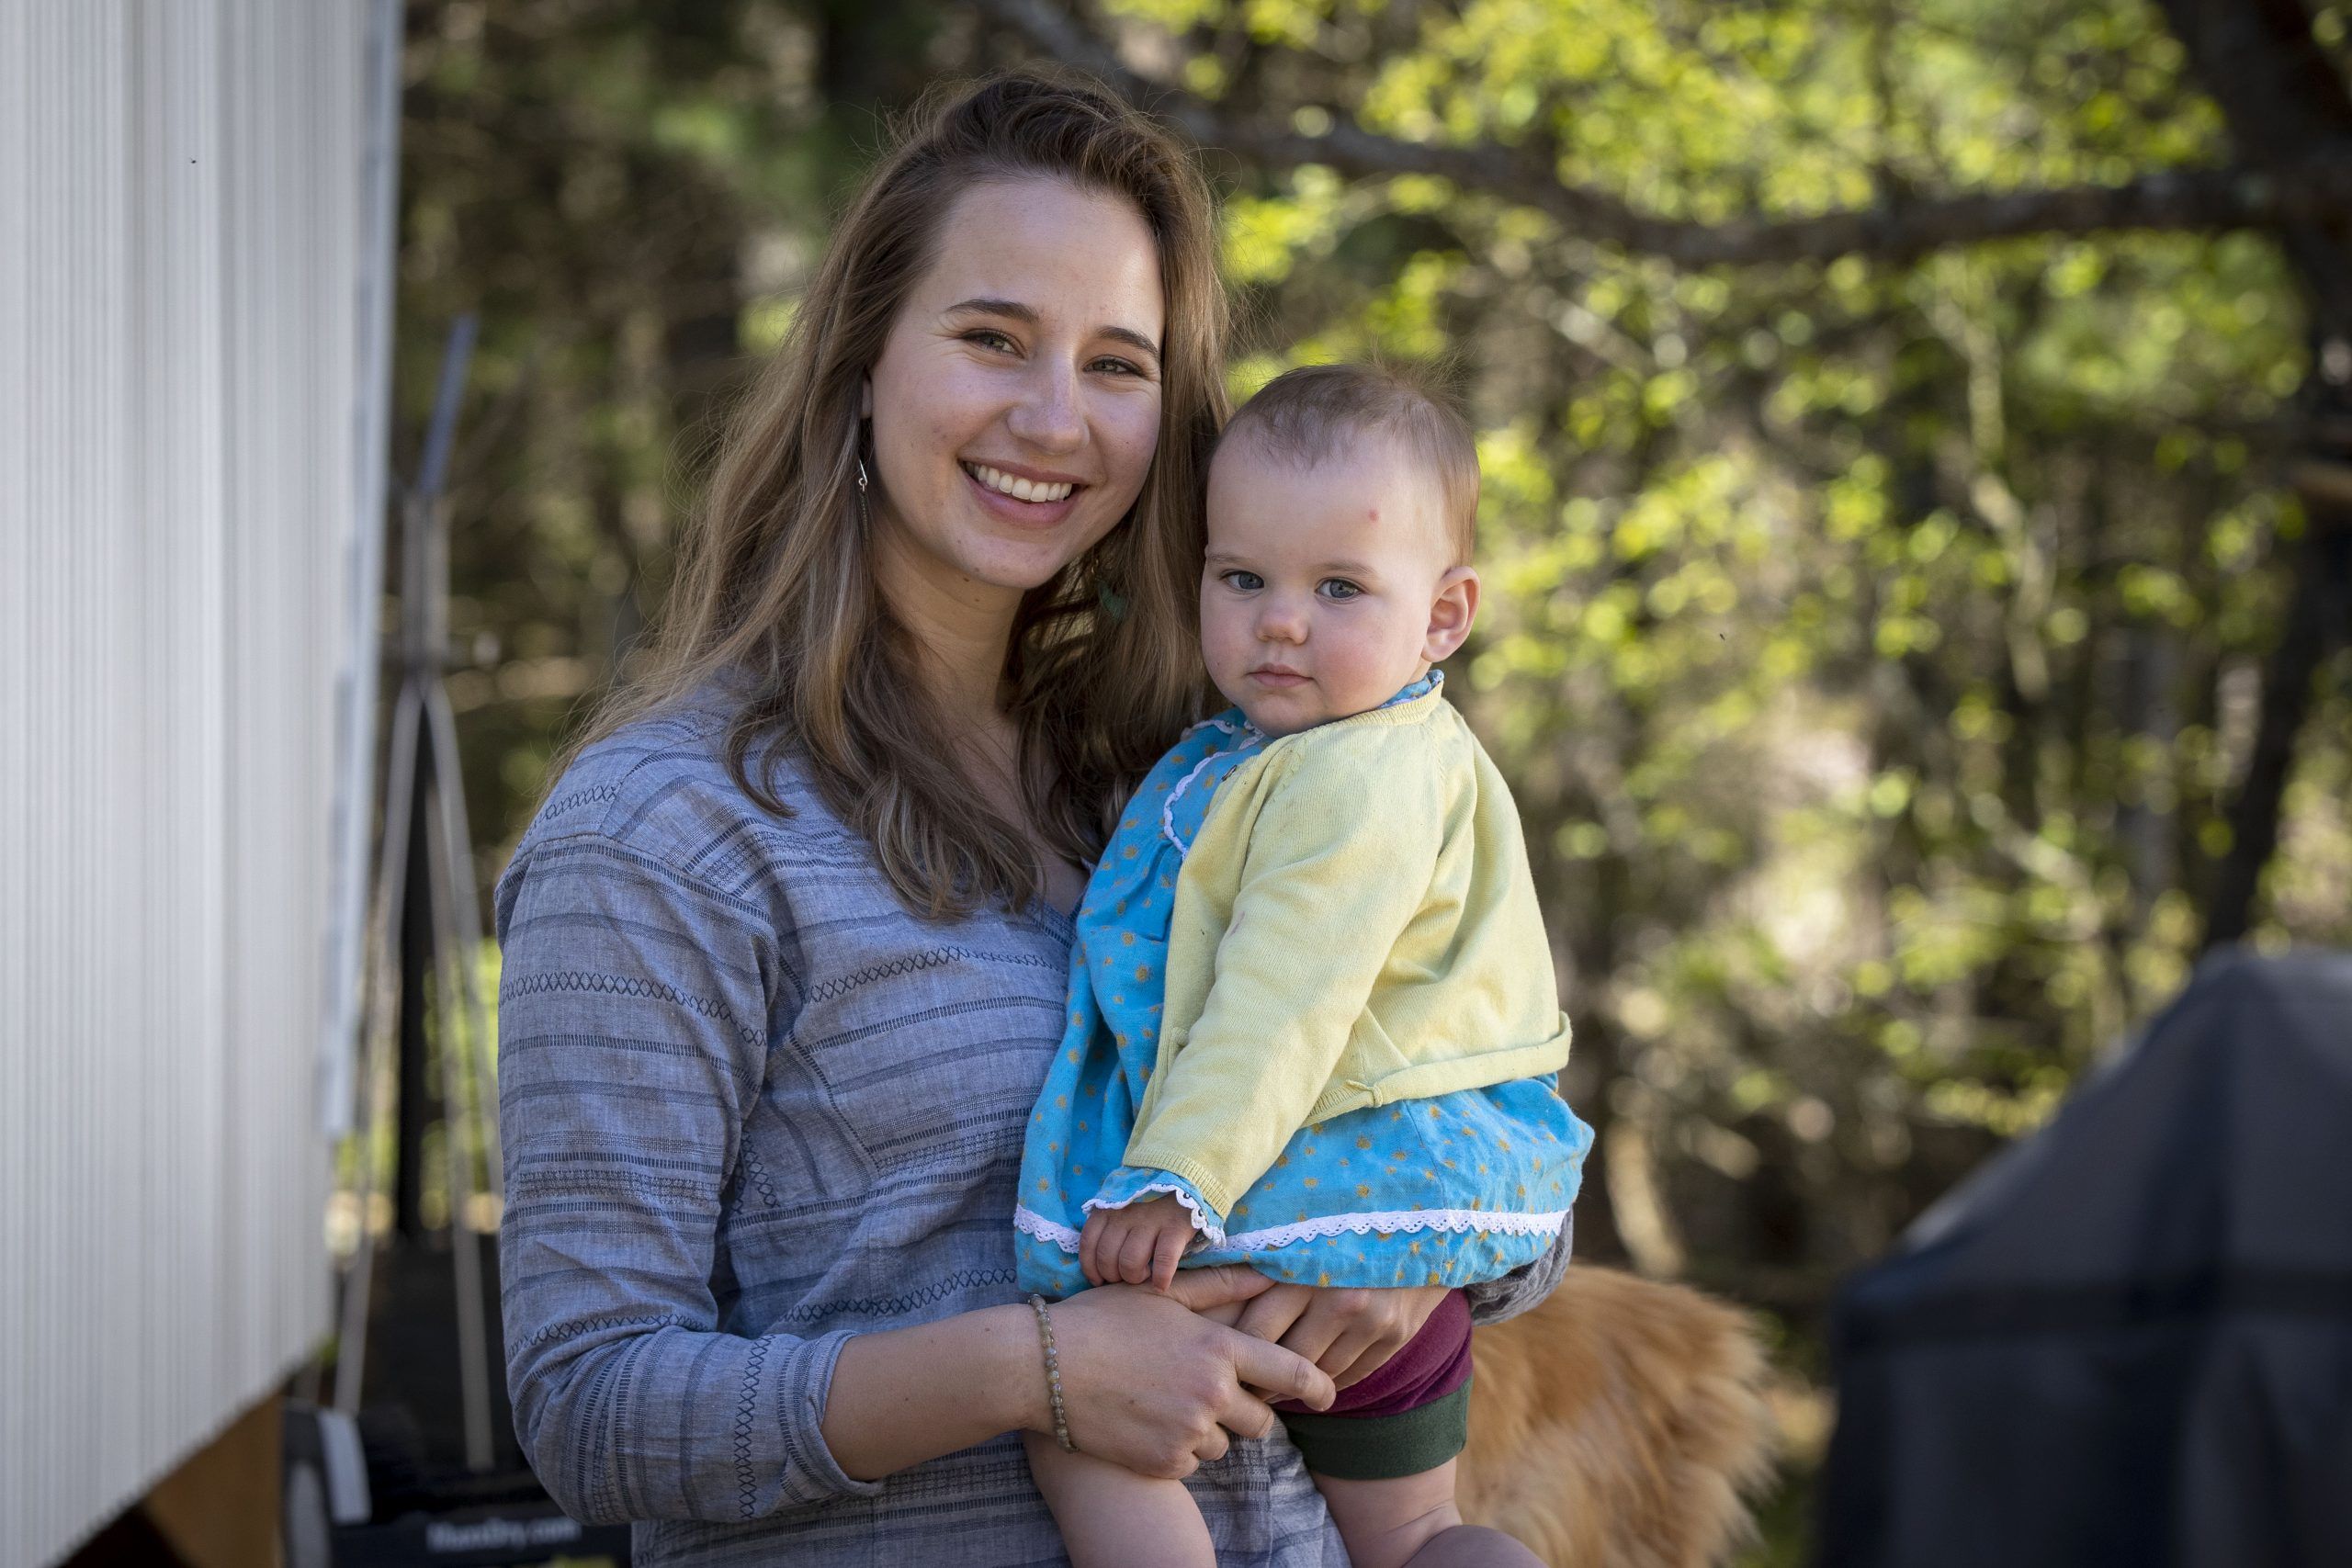  Leah Timmermann, from Maberly, Ontario (near Perth), shown here with her 12-month old daughter, had questions about starting a family and taking proper care of her health.